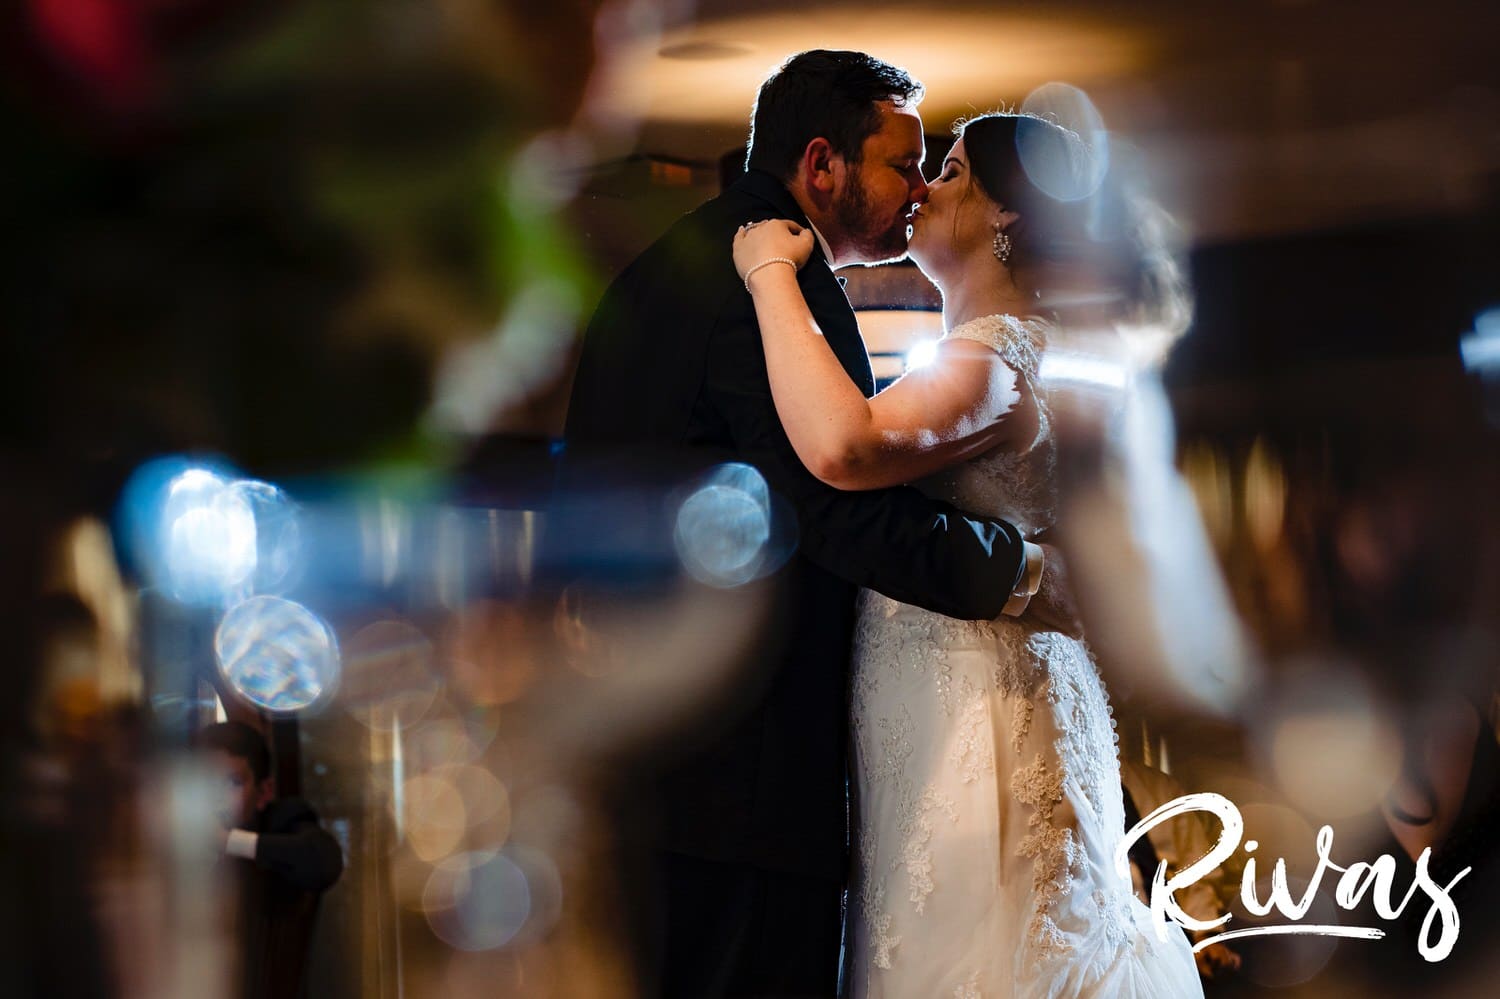 A candid picture taken through champagne glasses and floral arrangements on a table of a bride and groom sharing a kiss during their first dance at their summer wedding reception at Lawrence Country Club. 